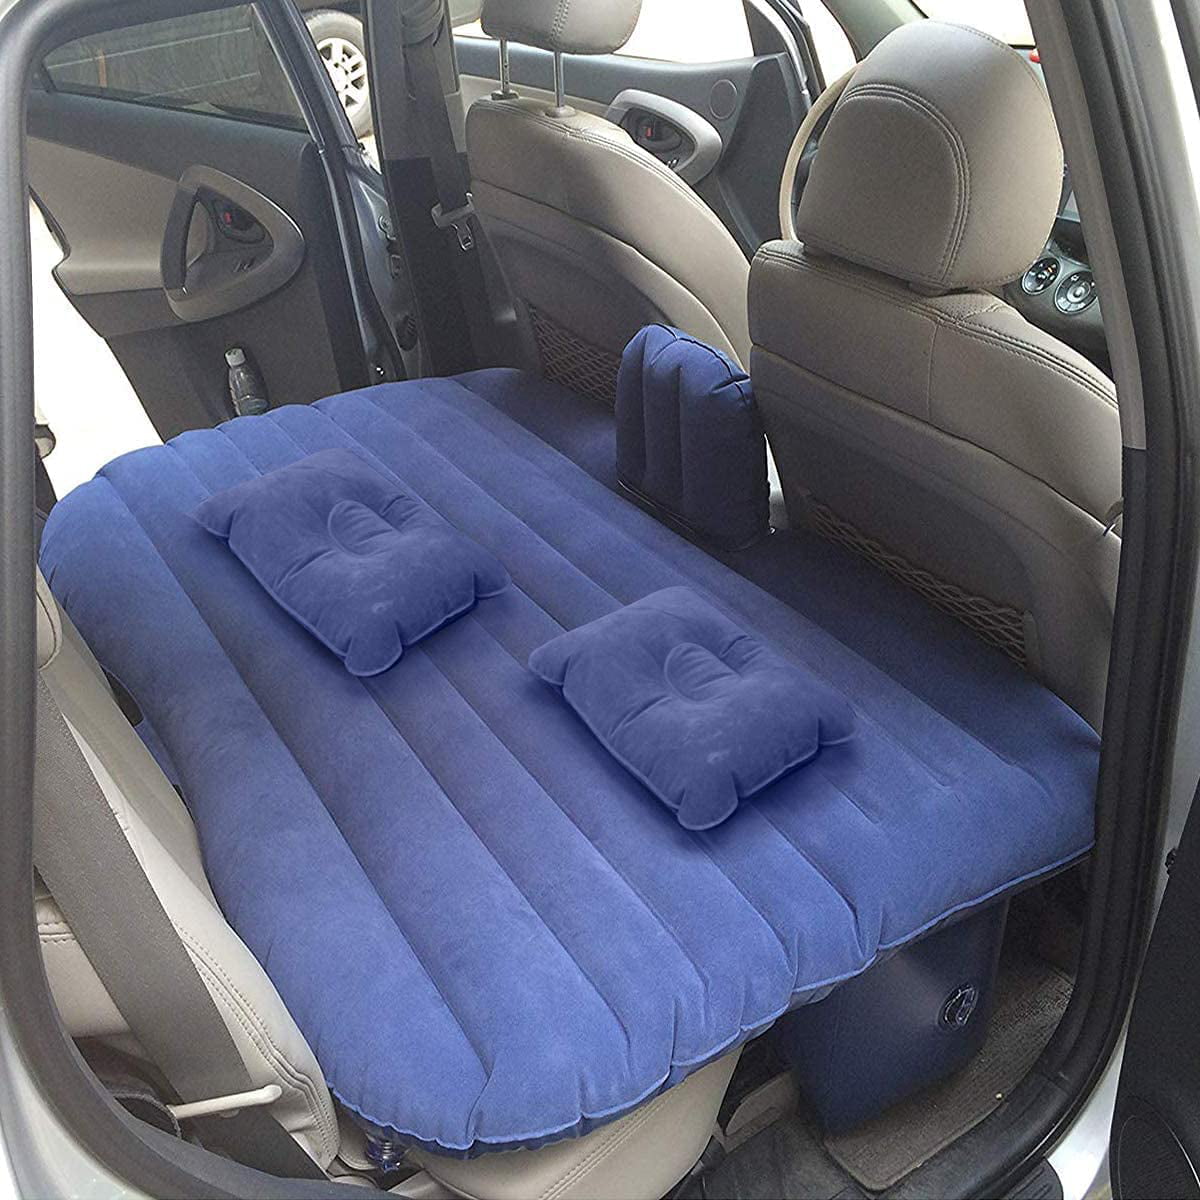 FIELDOOR Car Sleeping Mat 5cm Thick M Size Auto-Inflatable